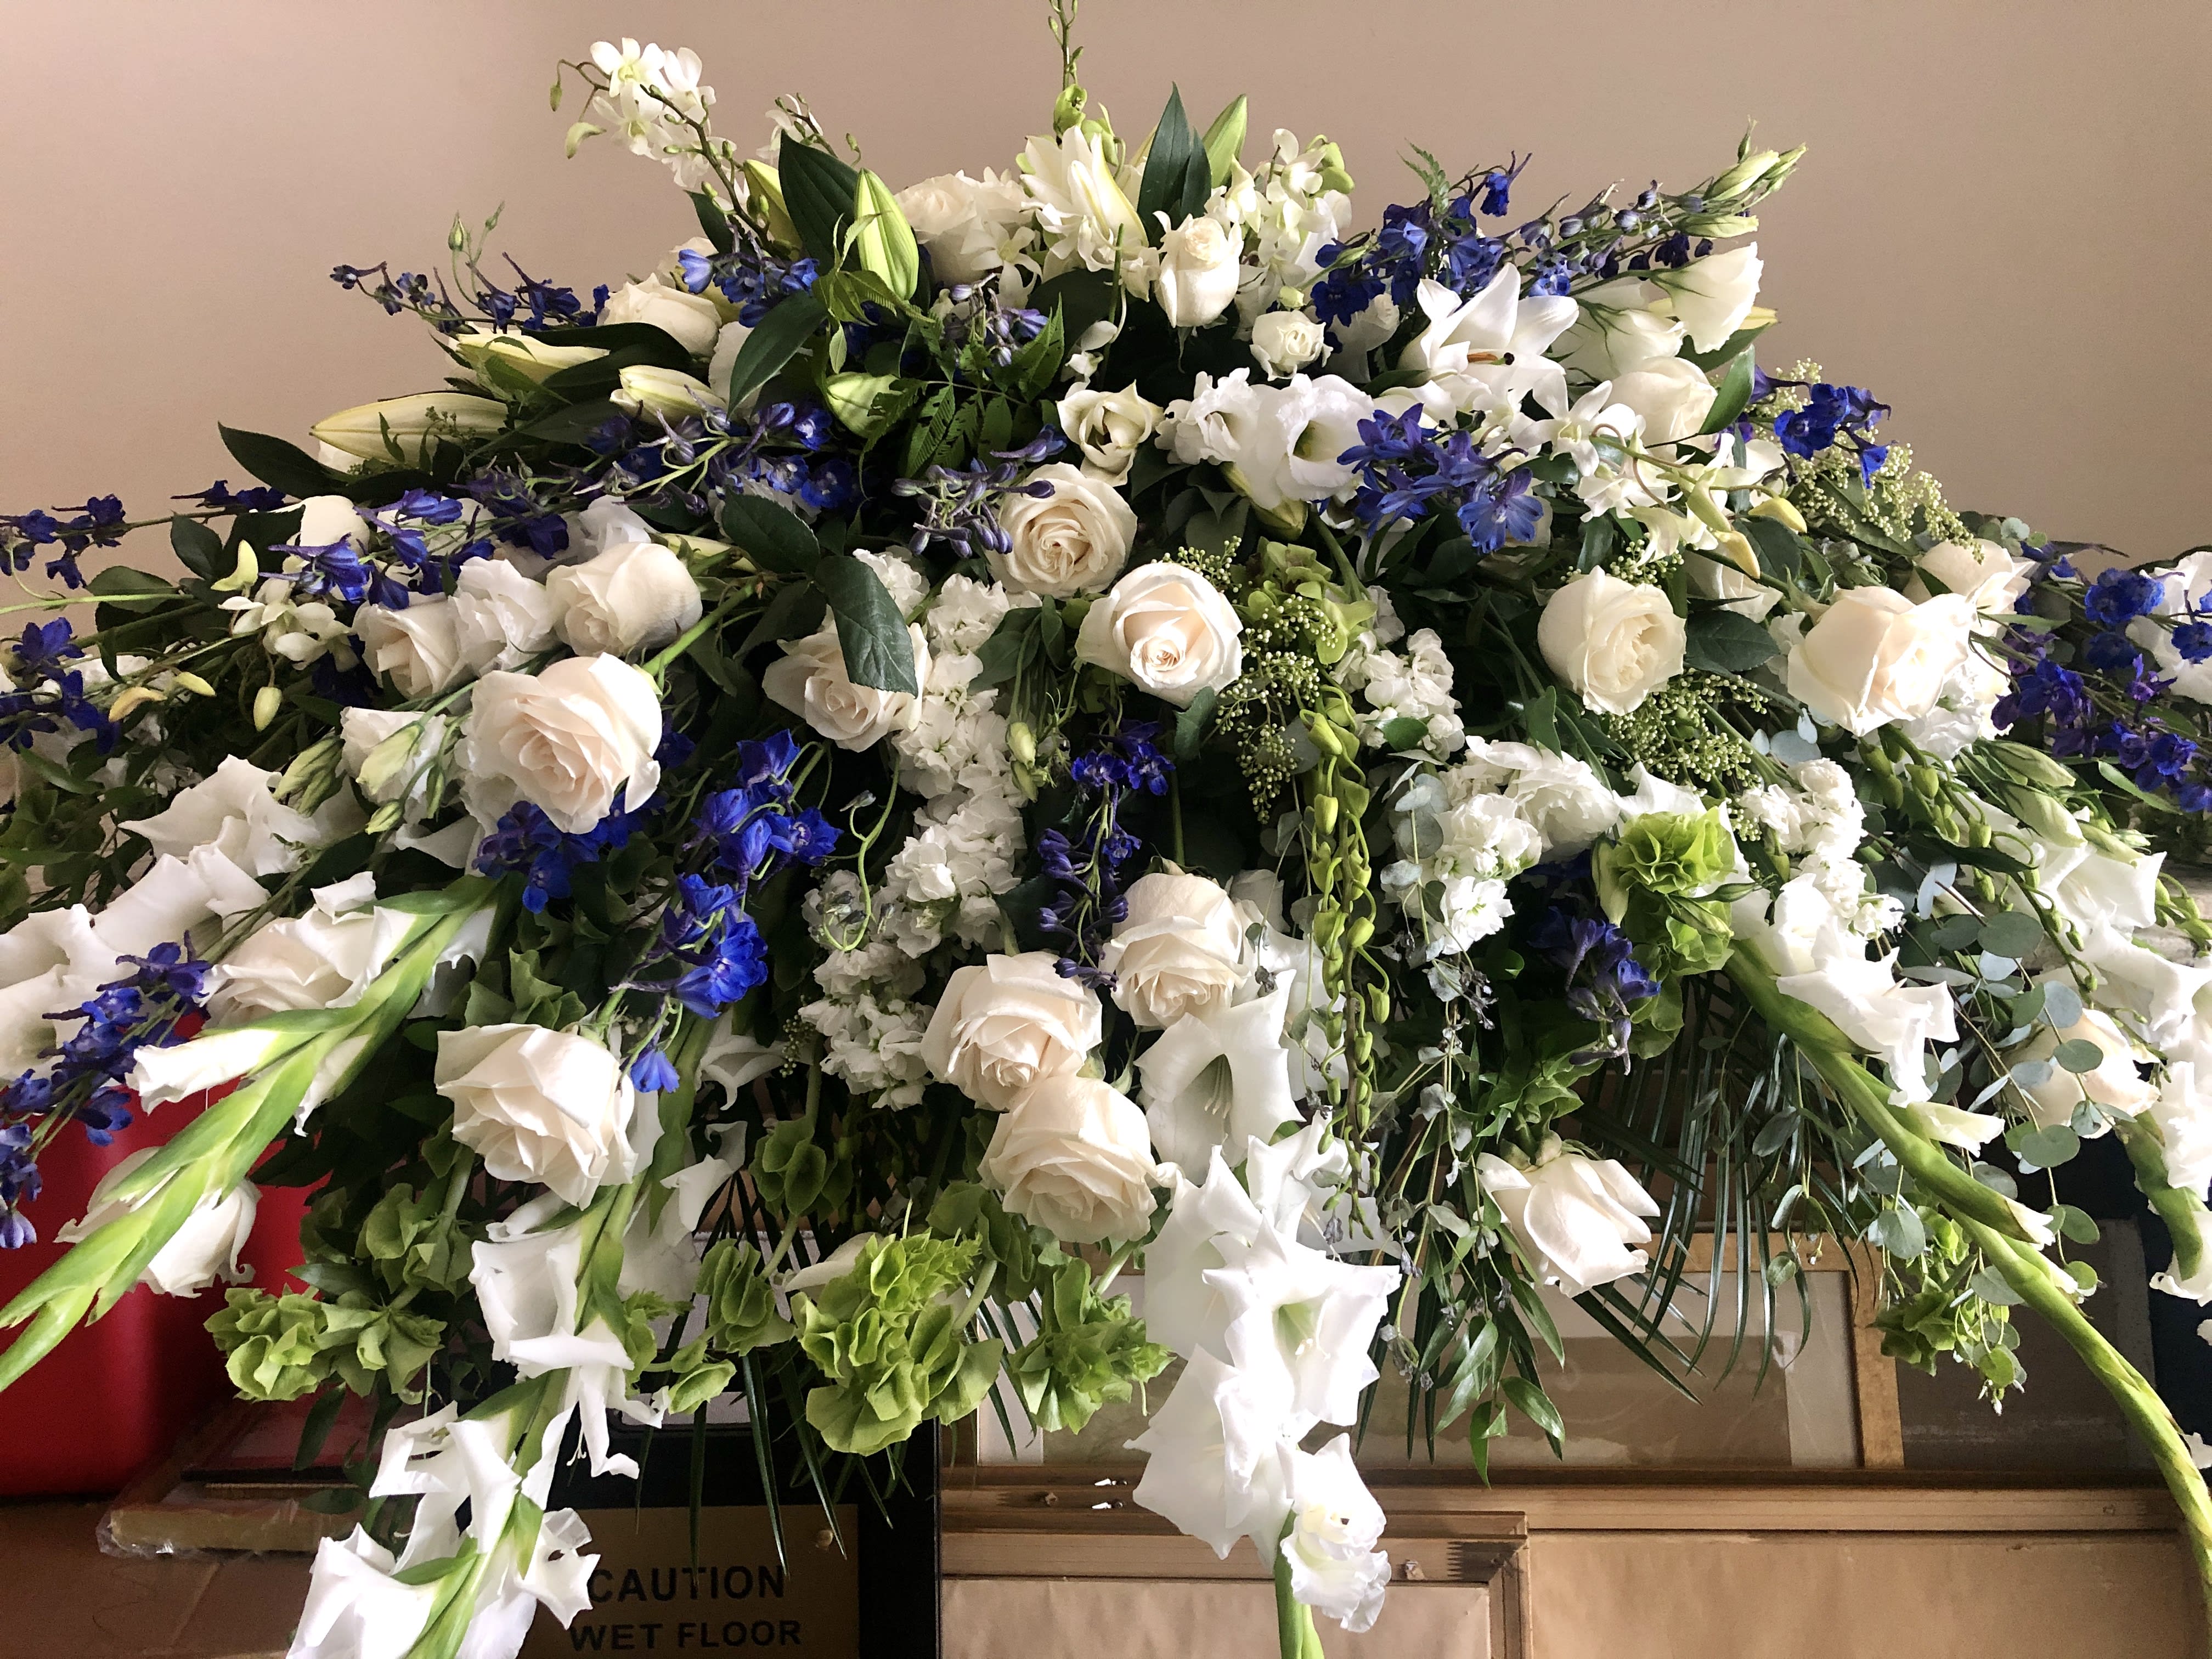 Funeral Flowers for Men: Types & Personal Touches